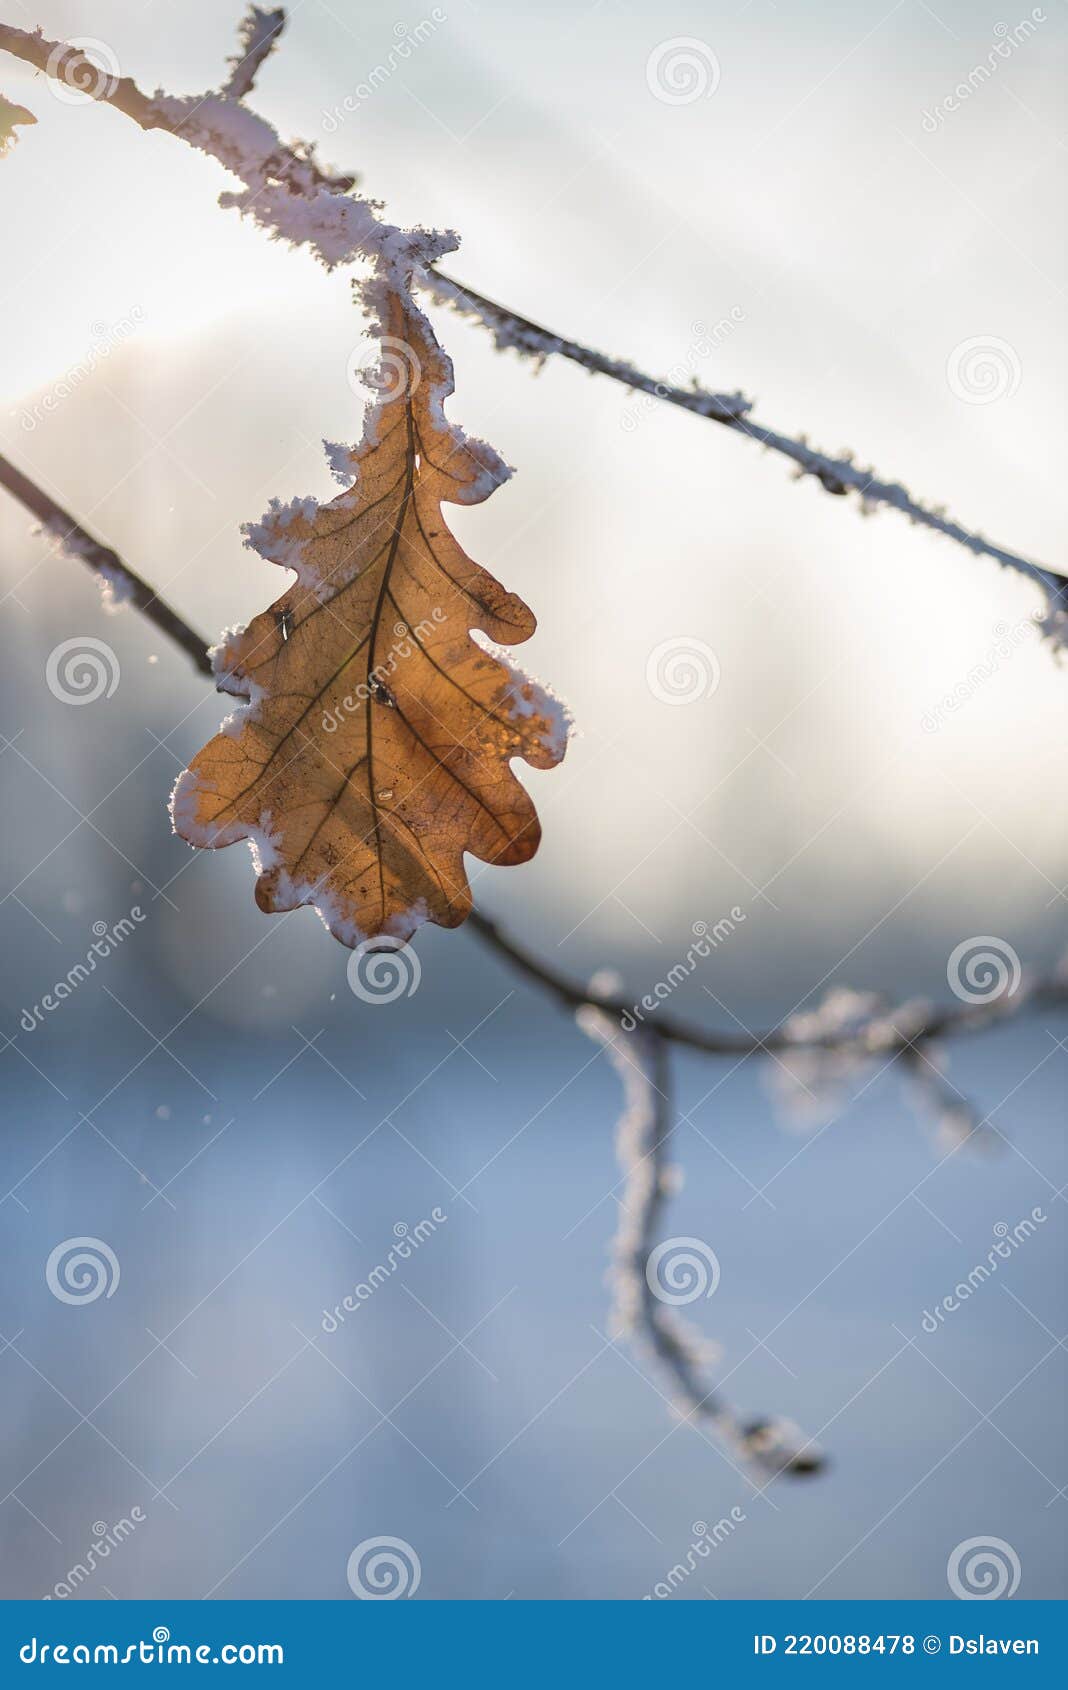 Winter Greenery stock image. Image of leaf, winter, floral - 43947499